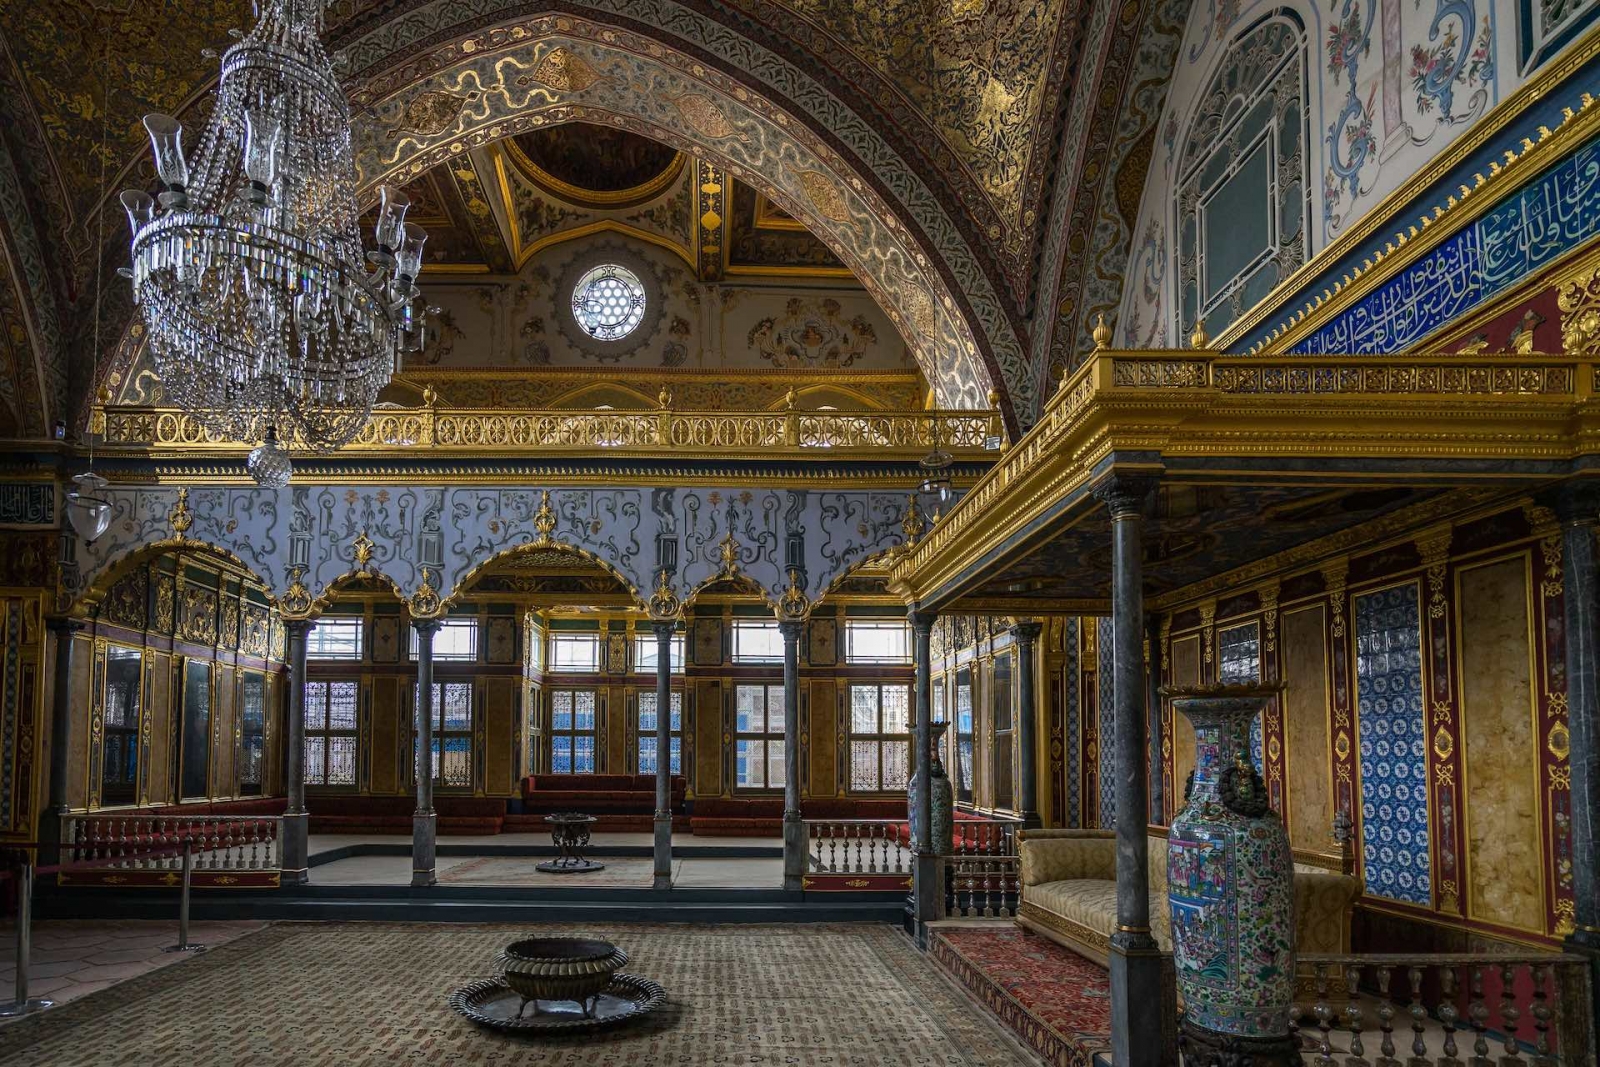 The luxurious and beautifully decorated Throne Room of Topkapi Palace harem, Istanbul, Turkey